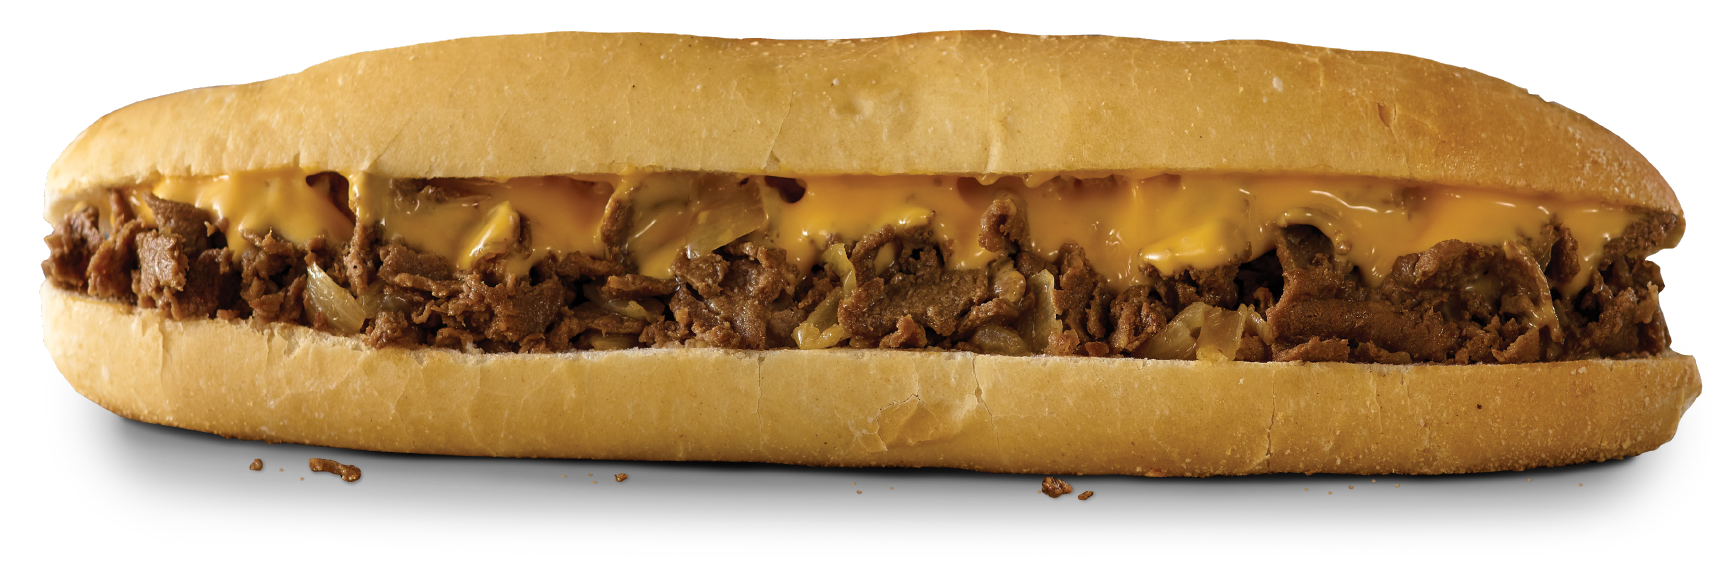 Image of a cheesesteak